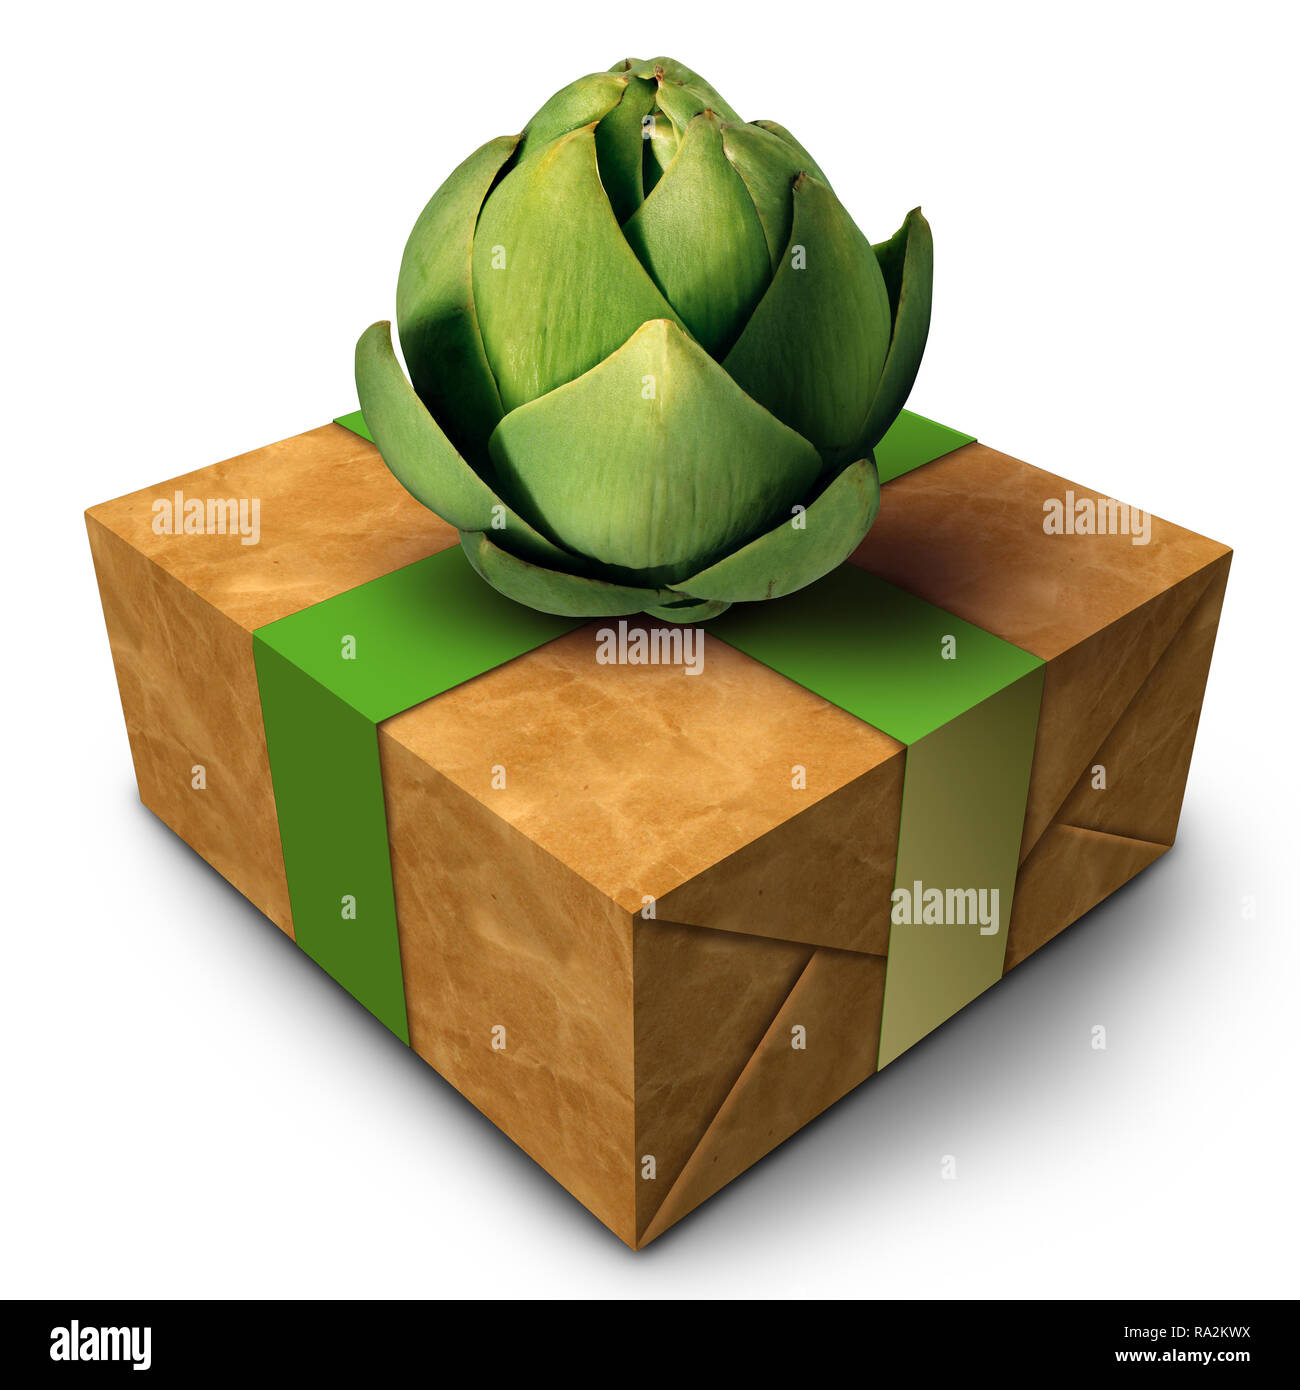 Wellness gift and healthy eating present or healthy organic farm produce food delivery with 3D illustration elements as an artichoke as a ribbon bow. Stock Photo